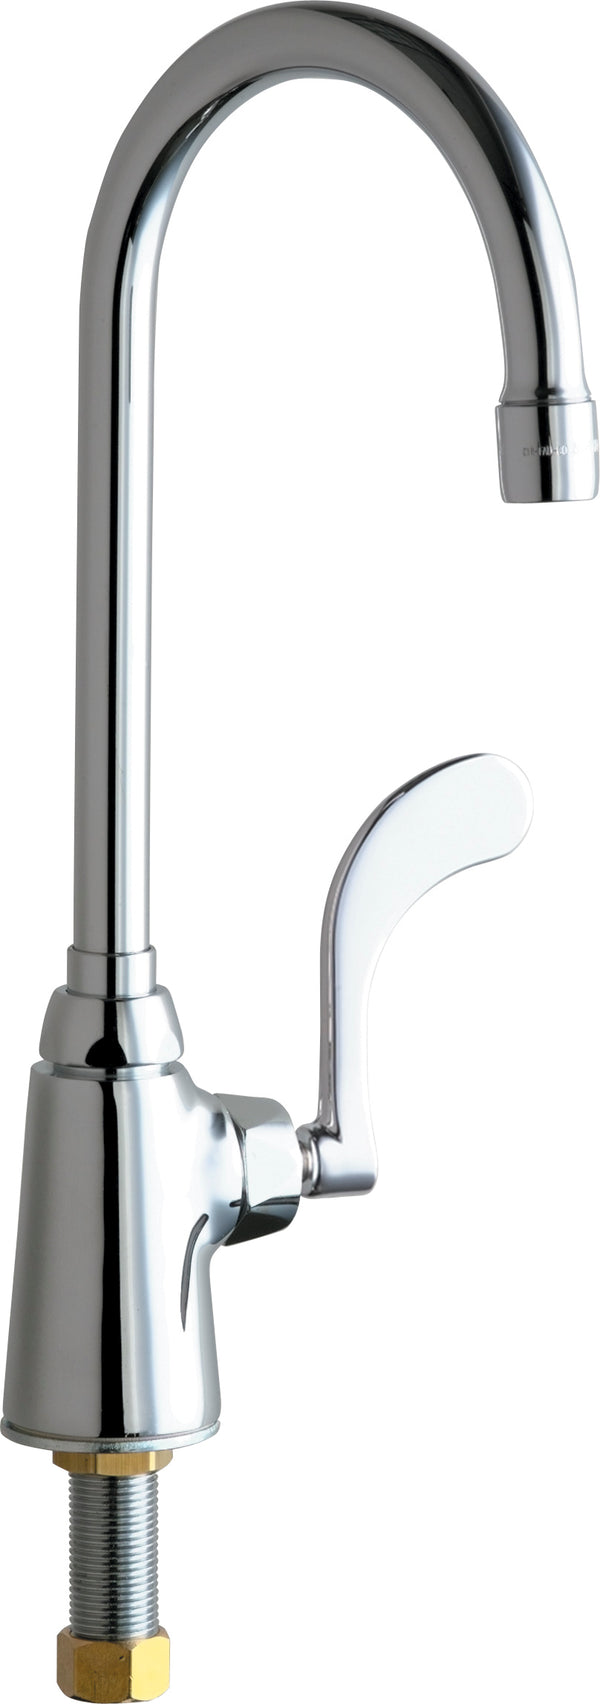 Chicago Faucets Pantry Sink Faucet 350-317XKABCP